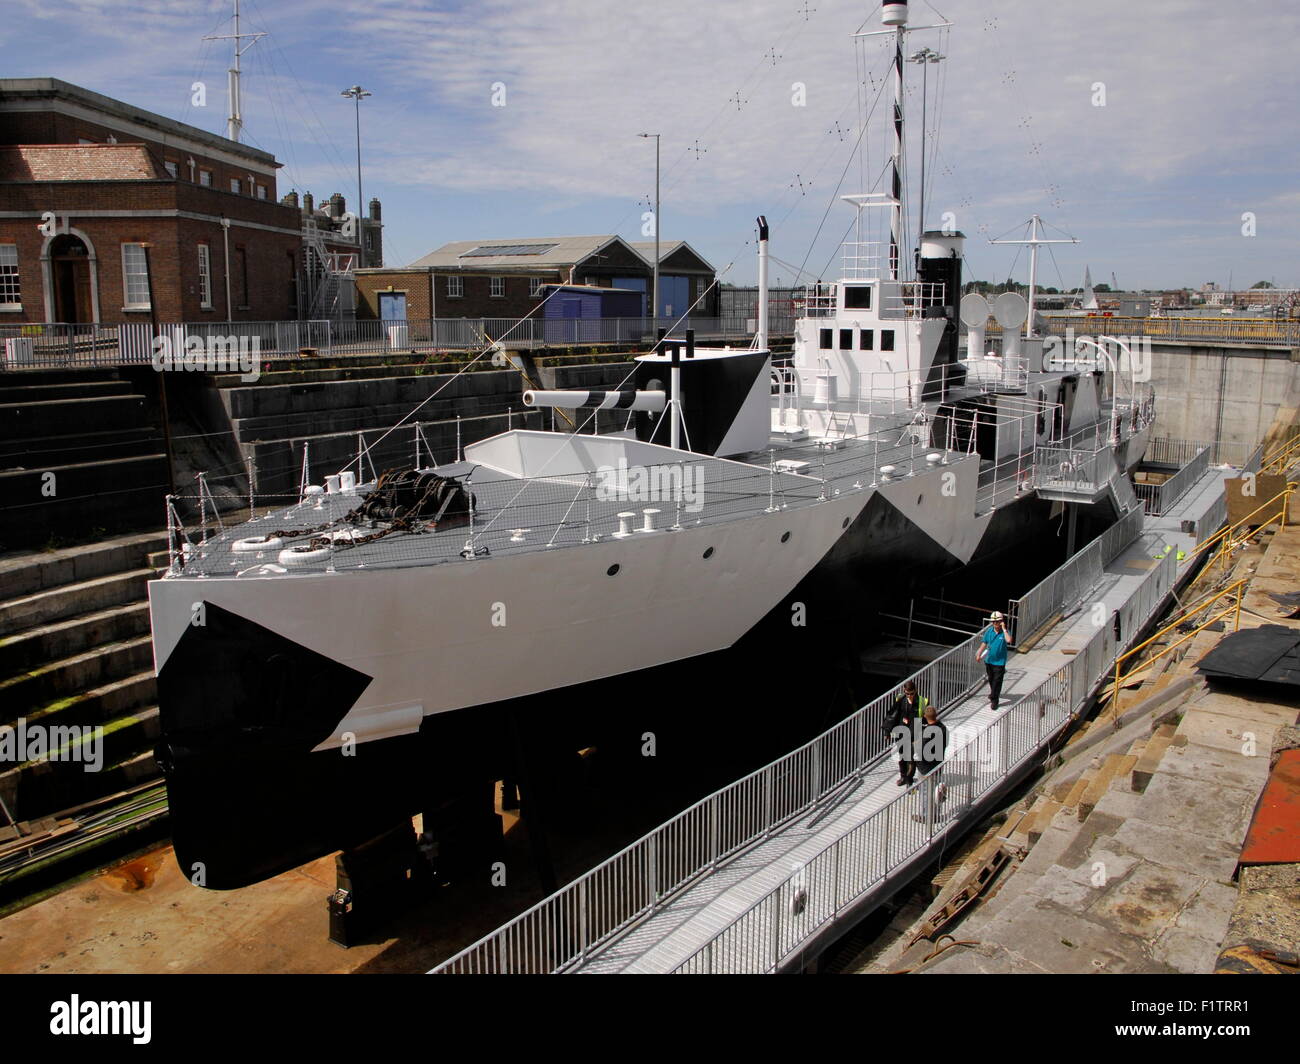 AJAXNETPHOTO. 4TH JUNE, 2015. PORTSMOUTH, ENGLAND. M-33 RESTORED - THE MONITOR CLASS SHIP HMS M-33 IN NR 1 DRY DOCK RESPLENDENT IN NEW DAZZLE PAINT OPENS TO THE PUBLIC MID SUMMER. PHOTO:JONATHAN EASTLAND/AJAX REF:D150406 5164 Stock Photo